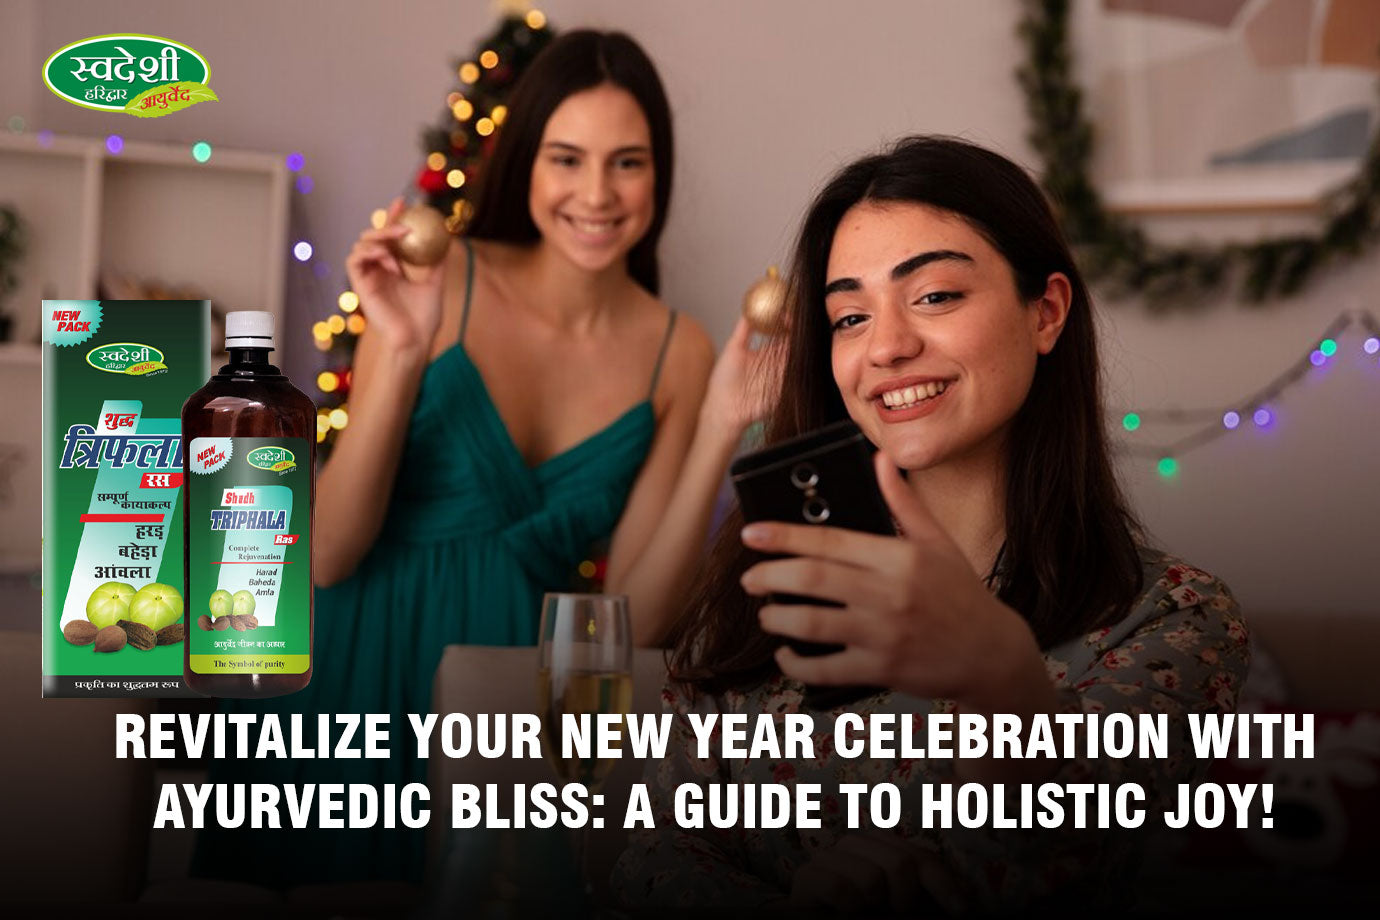 Revitalize Your New Year Celebration with Ayurvedic Bliss: A Guide to Holistic Joy!